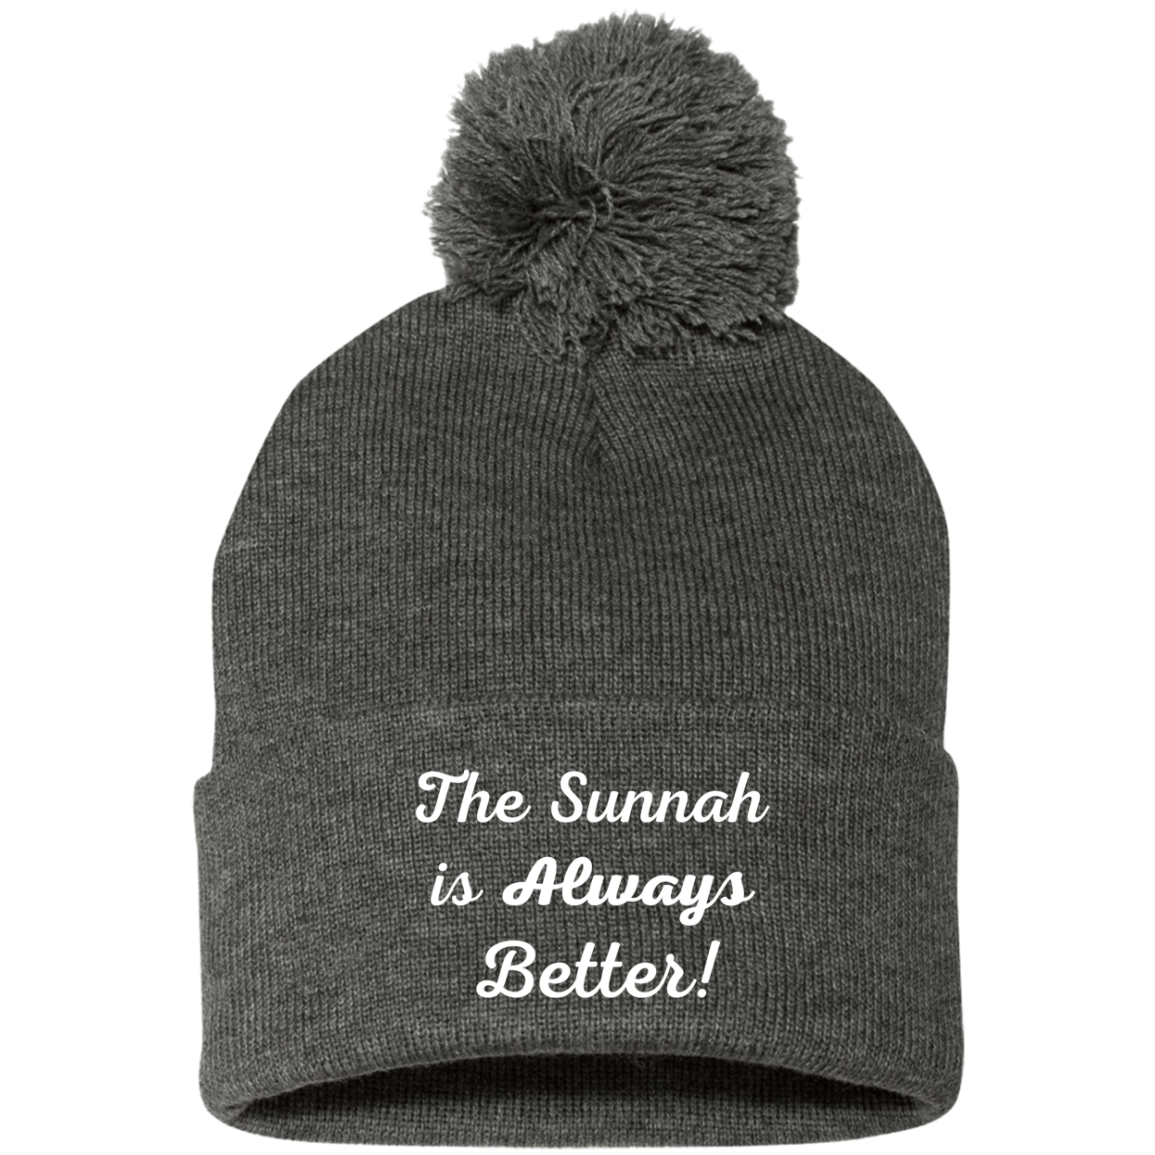 THE SUNNAH IS ALWAYS BETTER! Embroidered Pom Pom Knit Cap (MORE COLOR OPTIONS)